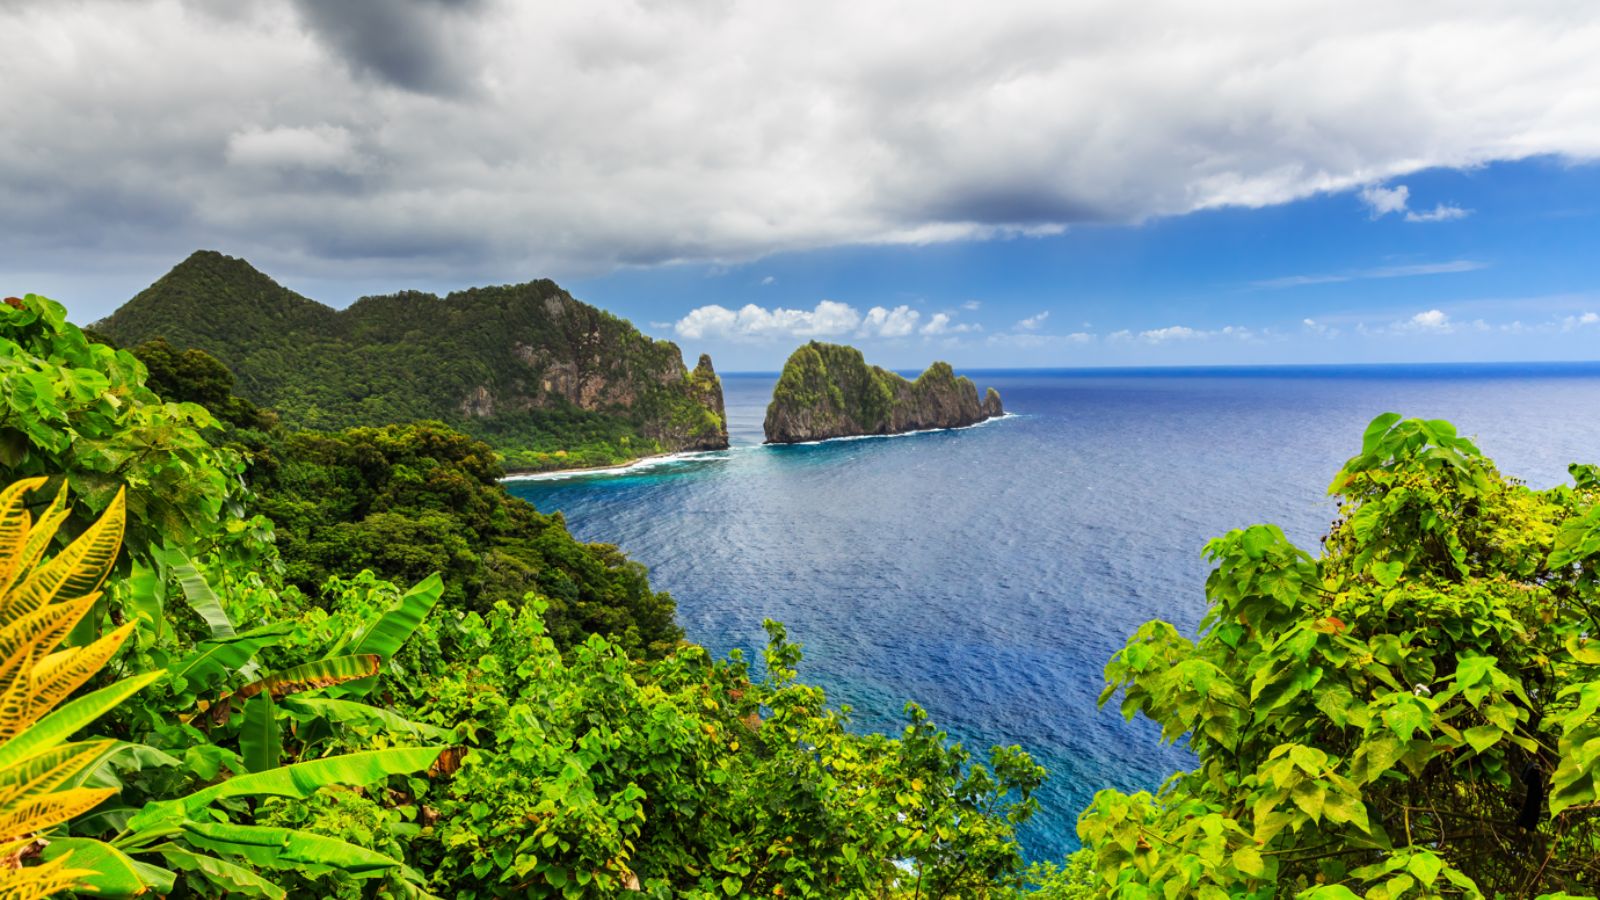 <p>Comprising the US territory of American Samoa are seven South Pacific islands. The National Park of American Samoa offers exploration opportunities amid tropical landscapes, including beaches, reefs, and rainforests. As of 2022, entry requirements have become more stringent, but visiting without a passport is still possible under specific conditions. The <a href="https://travel.state.gov/content/travel/en/international-travel/International-Travel-Country-Information-Pages/Samoa.html">US State Travel</a> provides comprehensive reports on these conditions, guiding potential travelers through the necessary steps and considerations for exploring this unique and picturesque territory.</p>